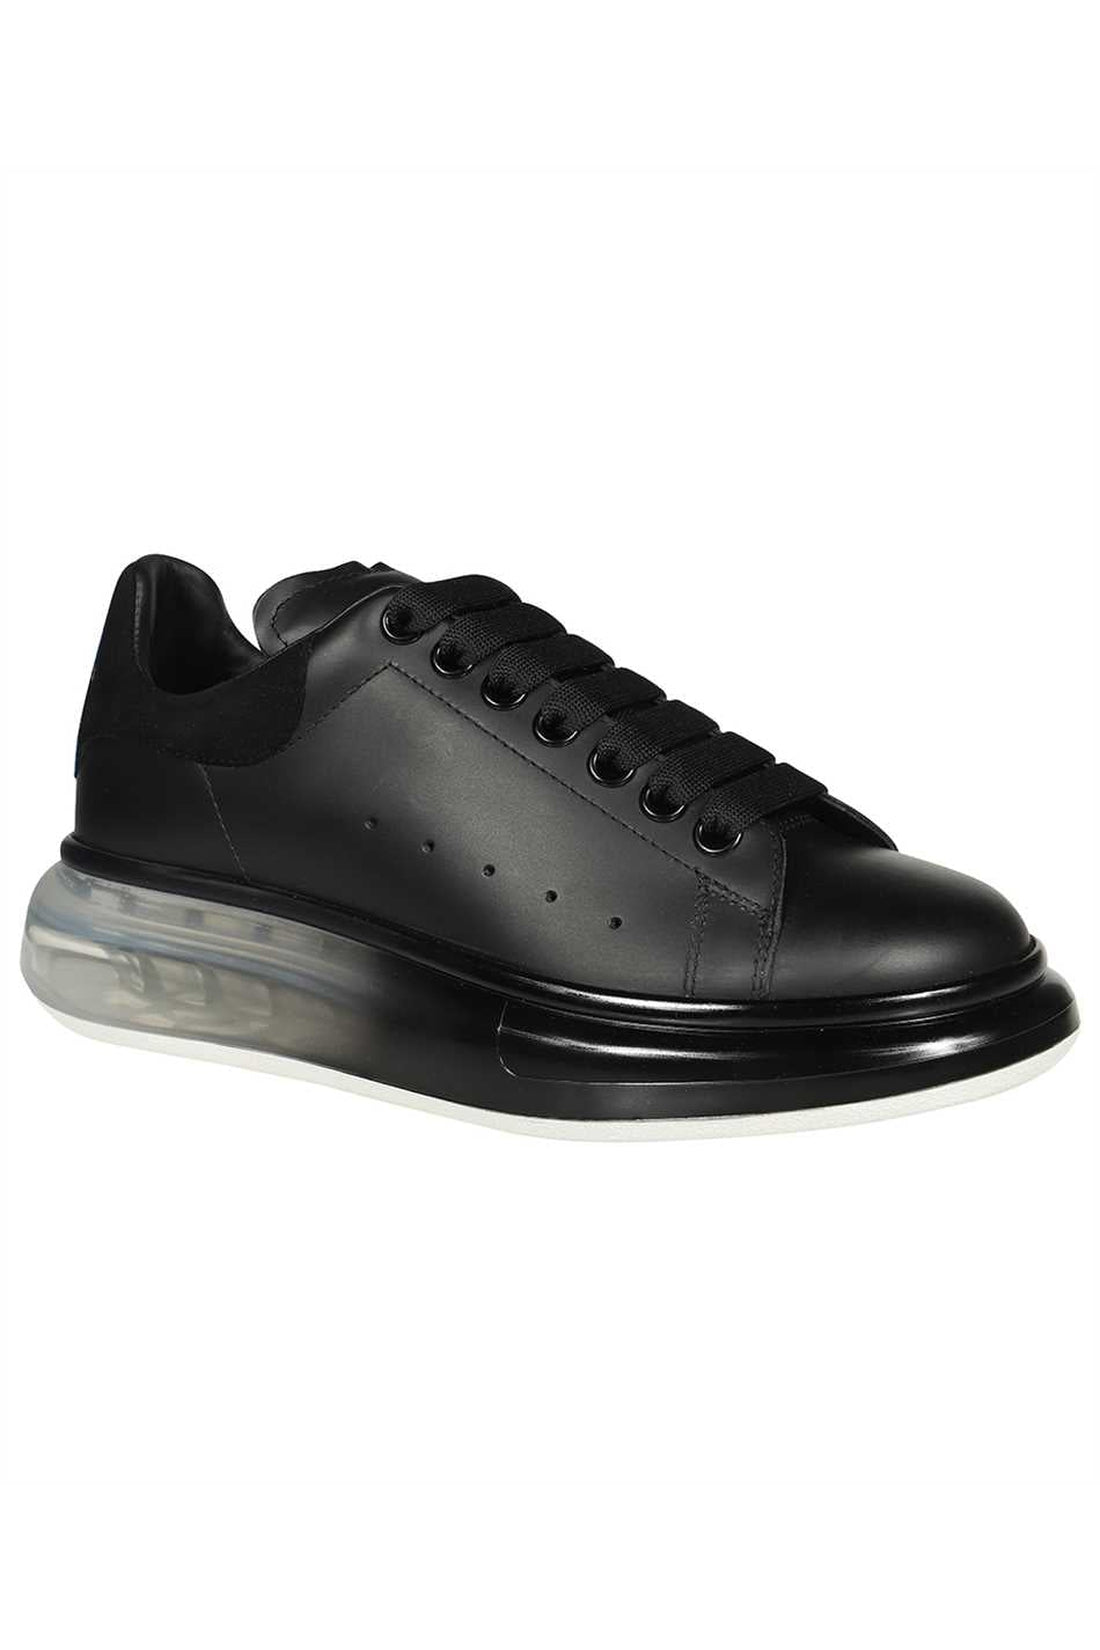 Alexander McQueen-OUTLET-SALE-Larry leather sneakers-ARCHIVIST